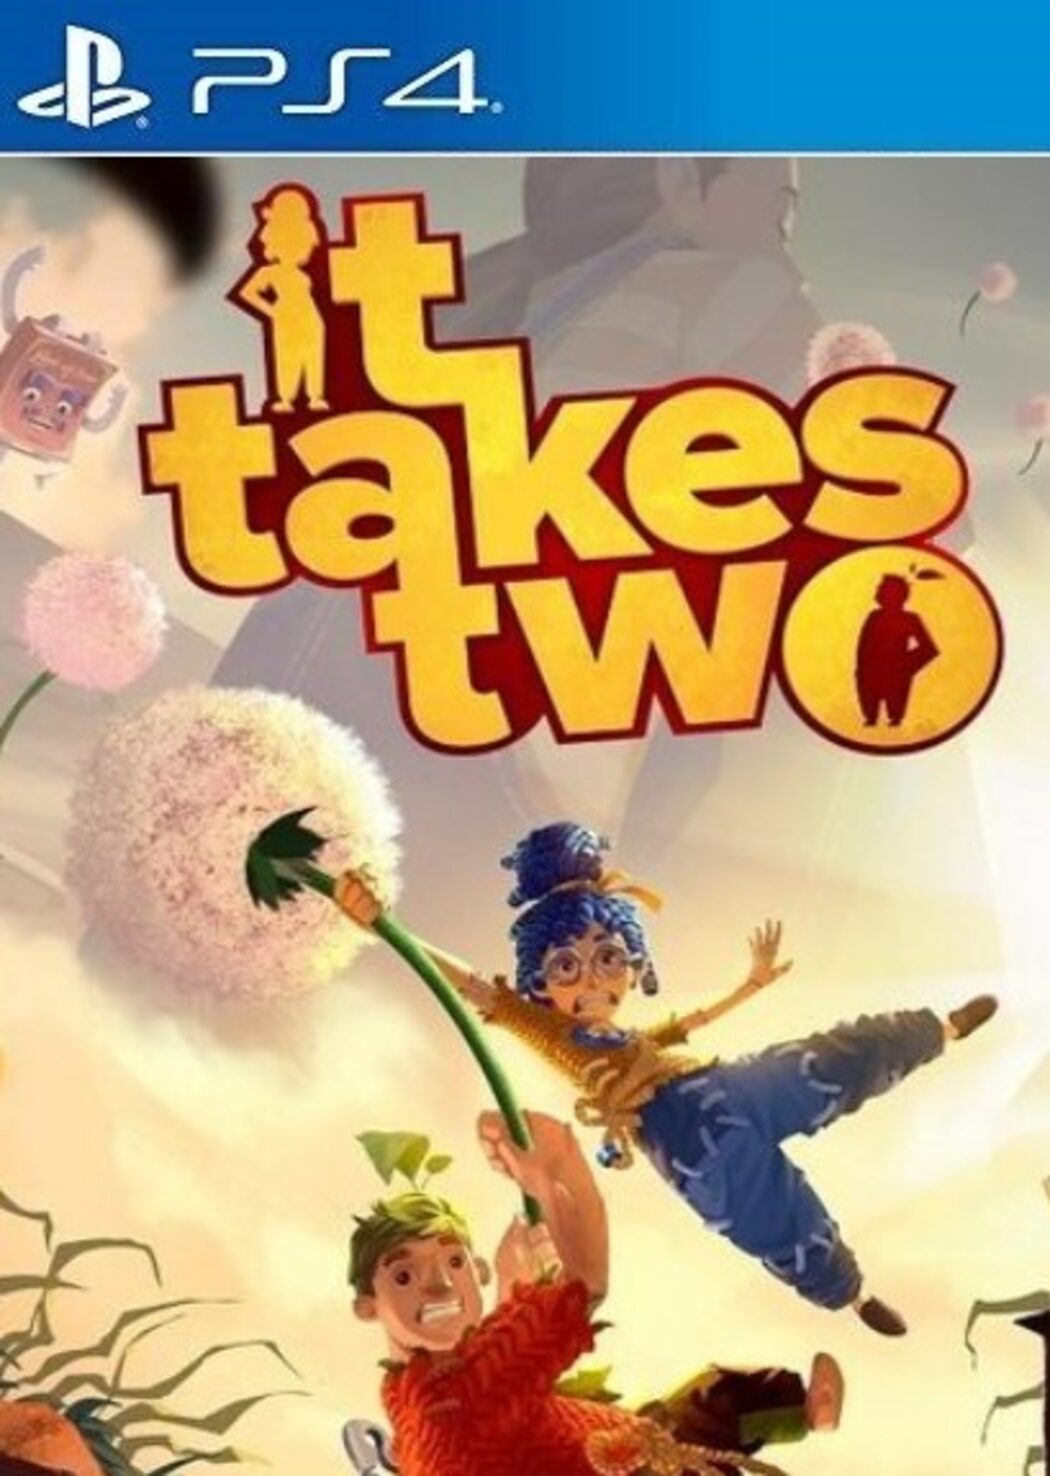 2 games отзывы. It takes two игра 2021. Xbox игра it takes two. Take two игра. It takes two Xbox one.